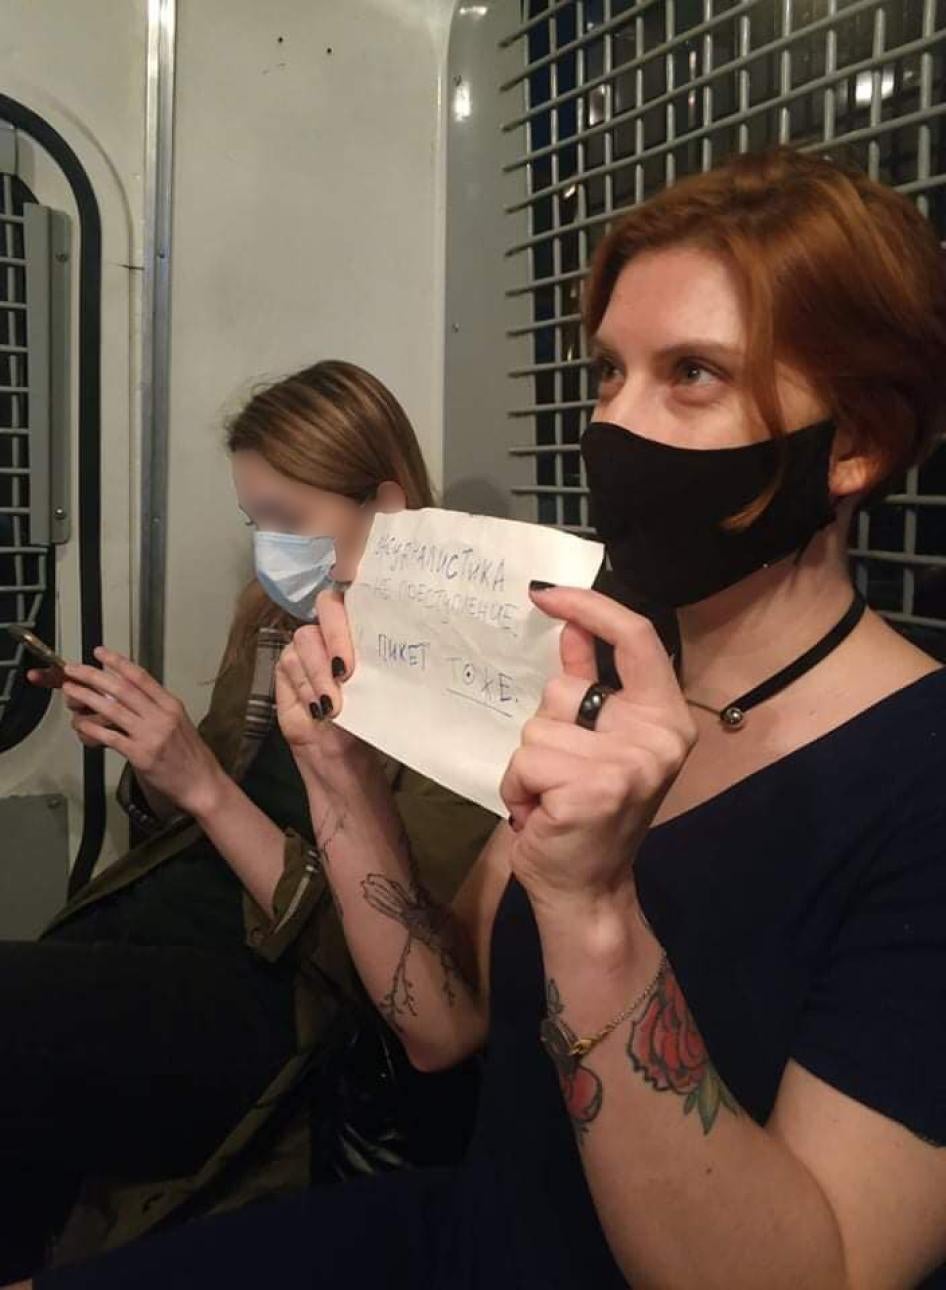 Mariya Chernykh in a police bus with a placard reading “Journalism is not a crime, neither is a picket”, July 7, 2020, Moscow.